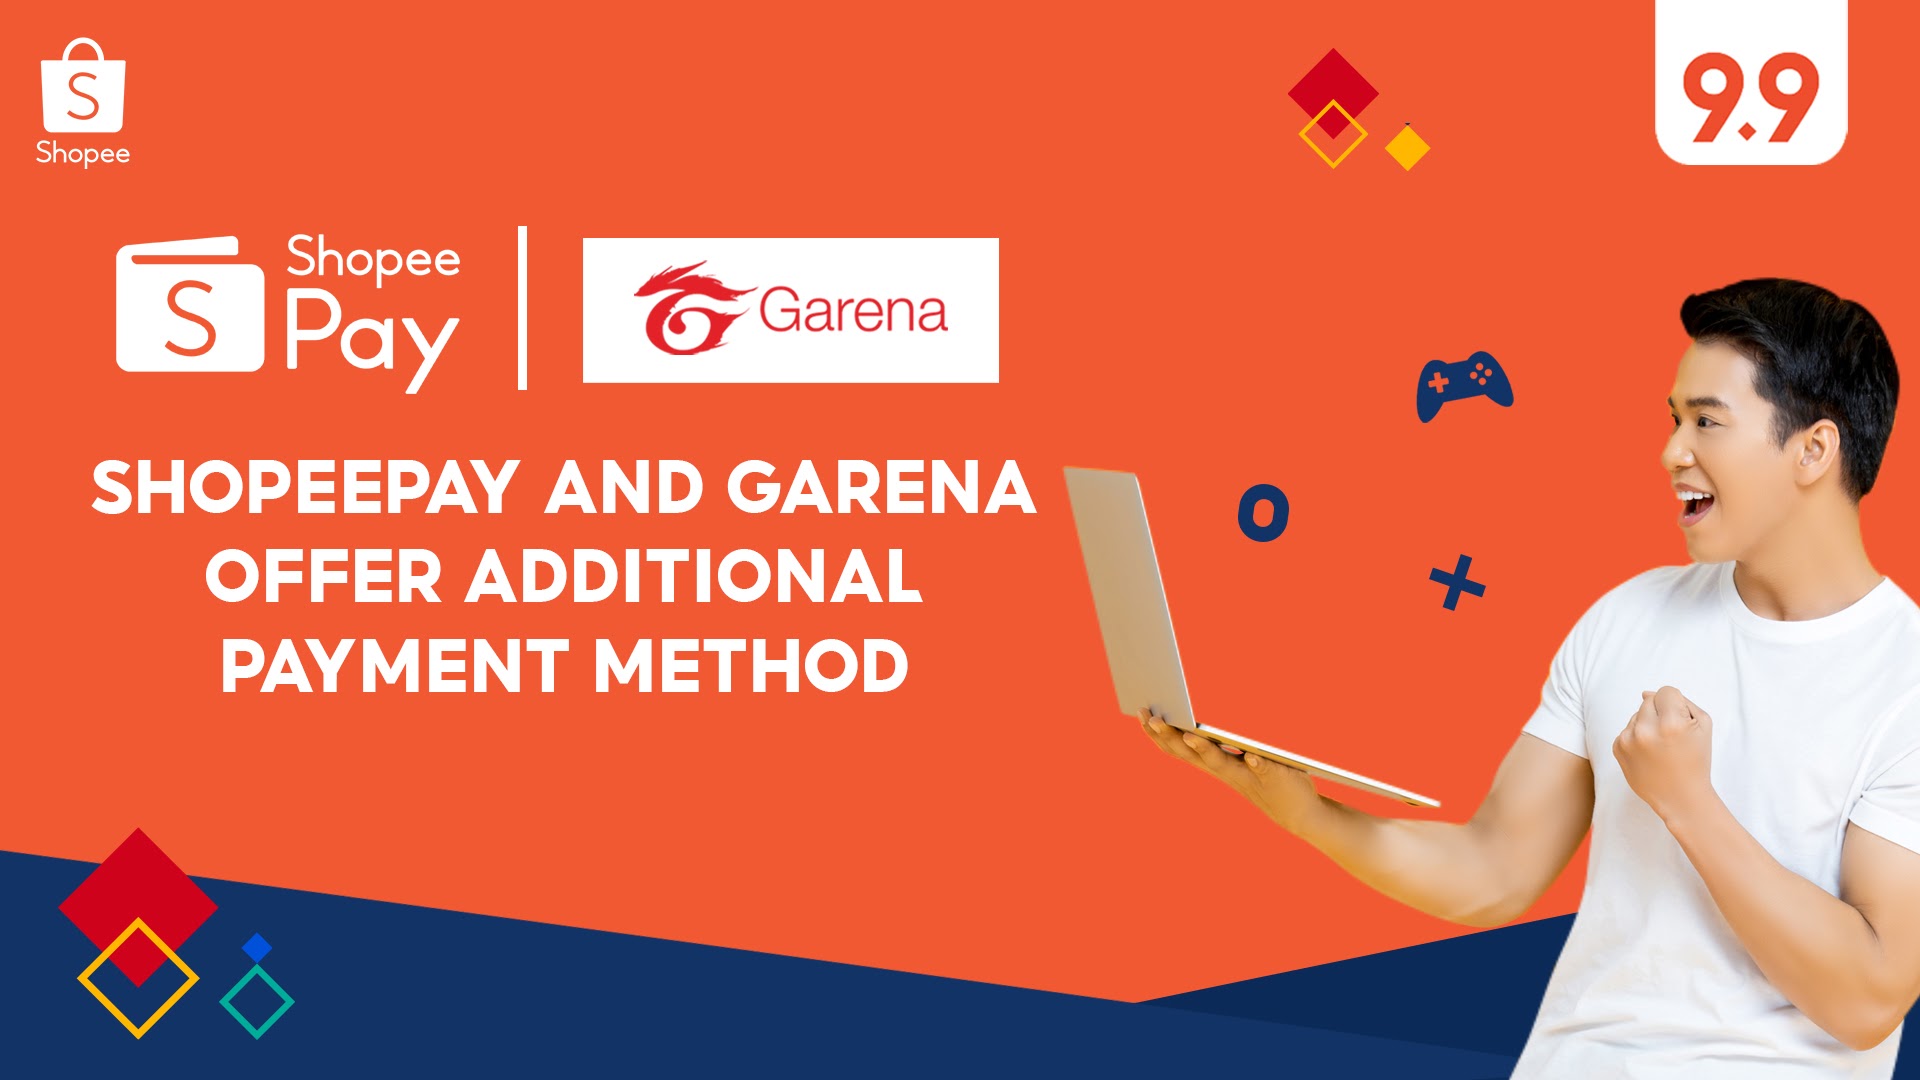 Garena users can now enjoy seamless in-game payments for League of Legends, Call of Duty, and Arena of Valor with ShopeePay